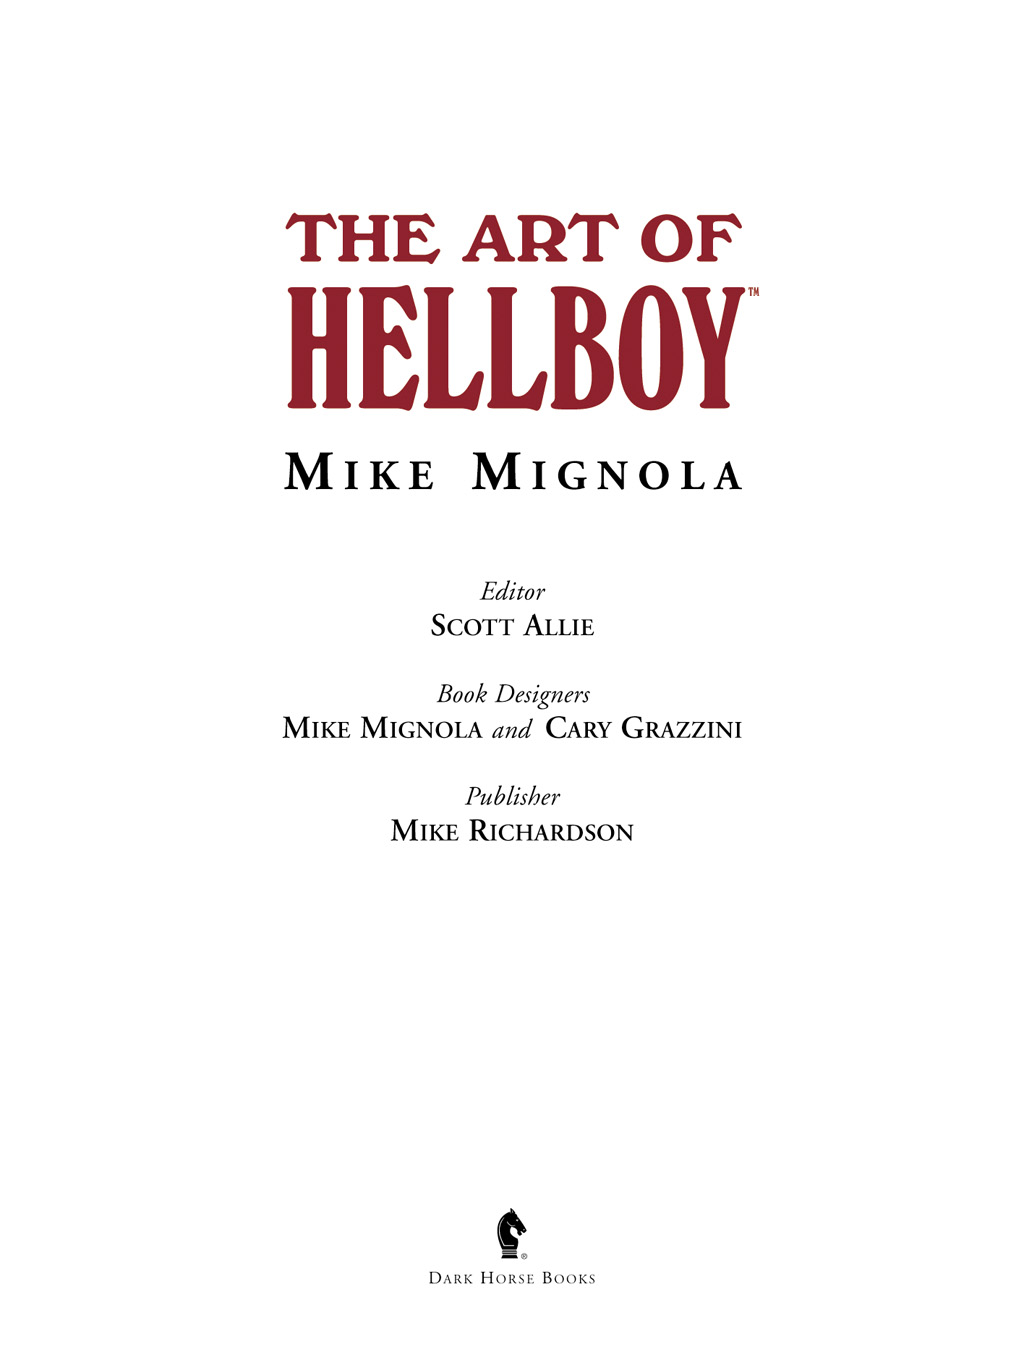 Read online The Art of Hellboy comic -  Issue # TPB - 4